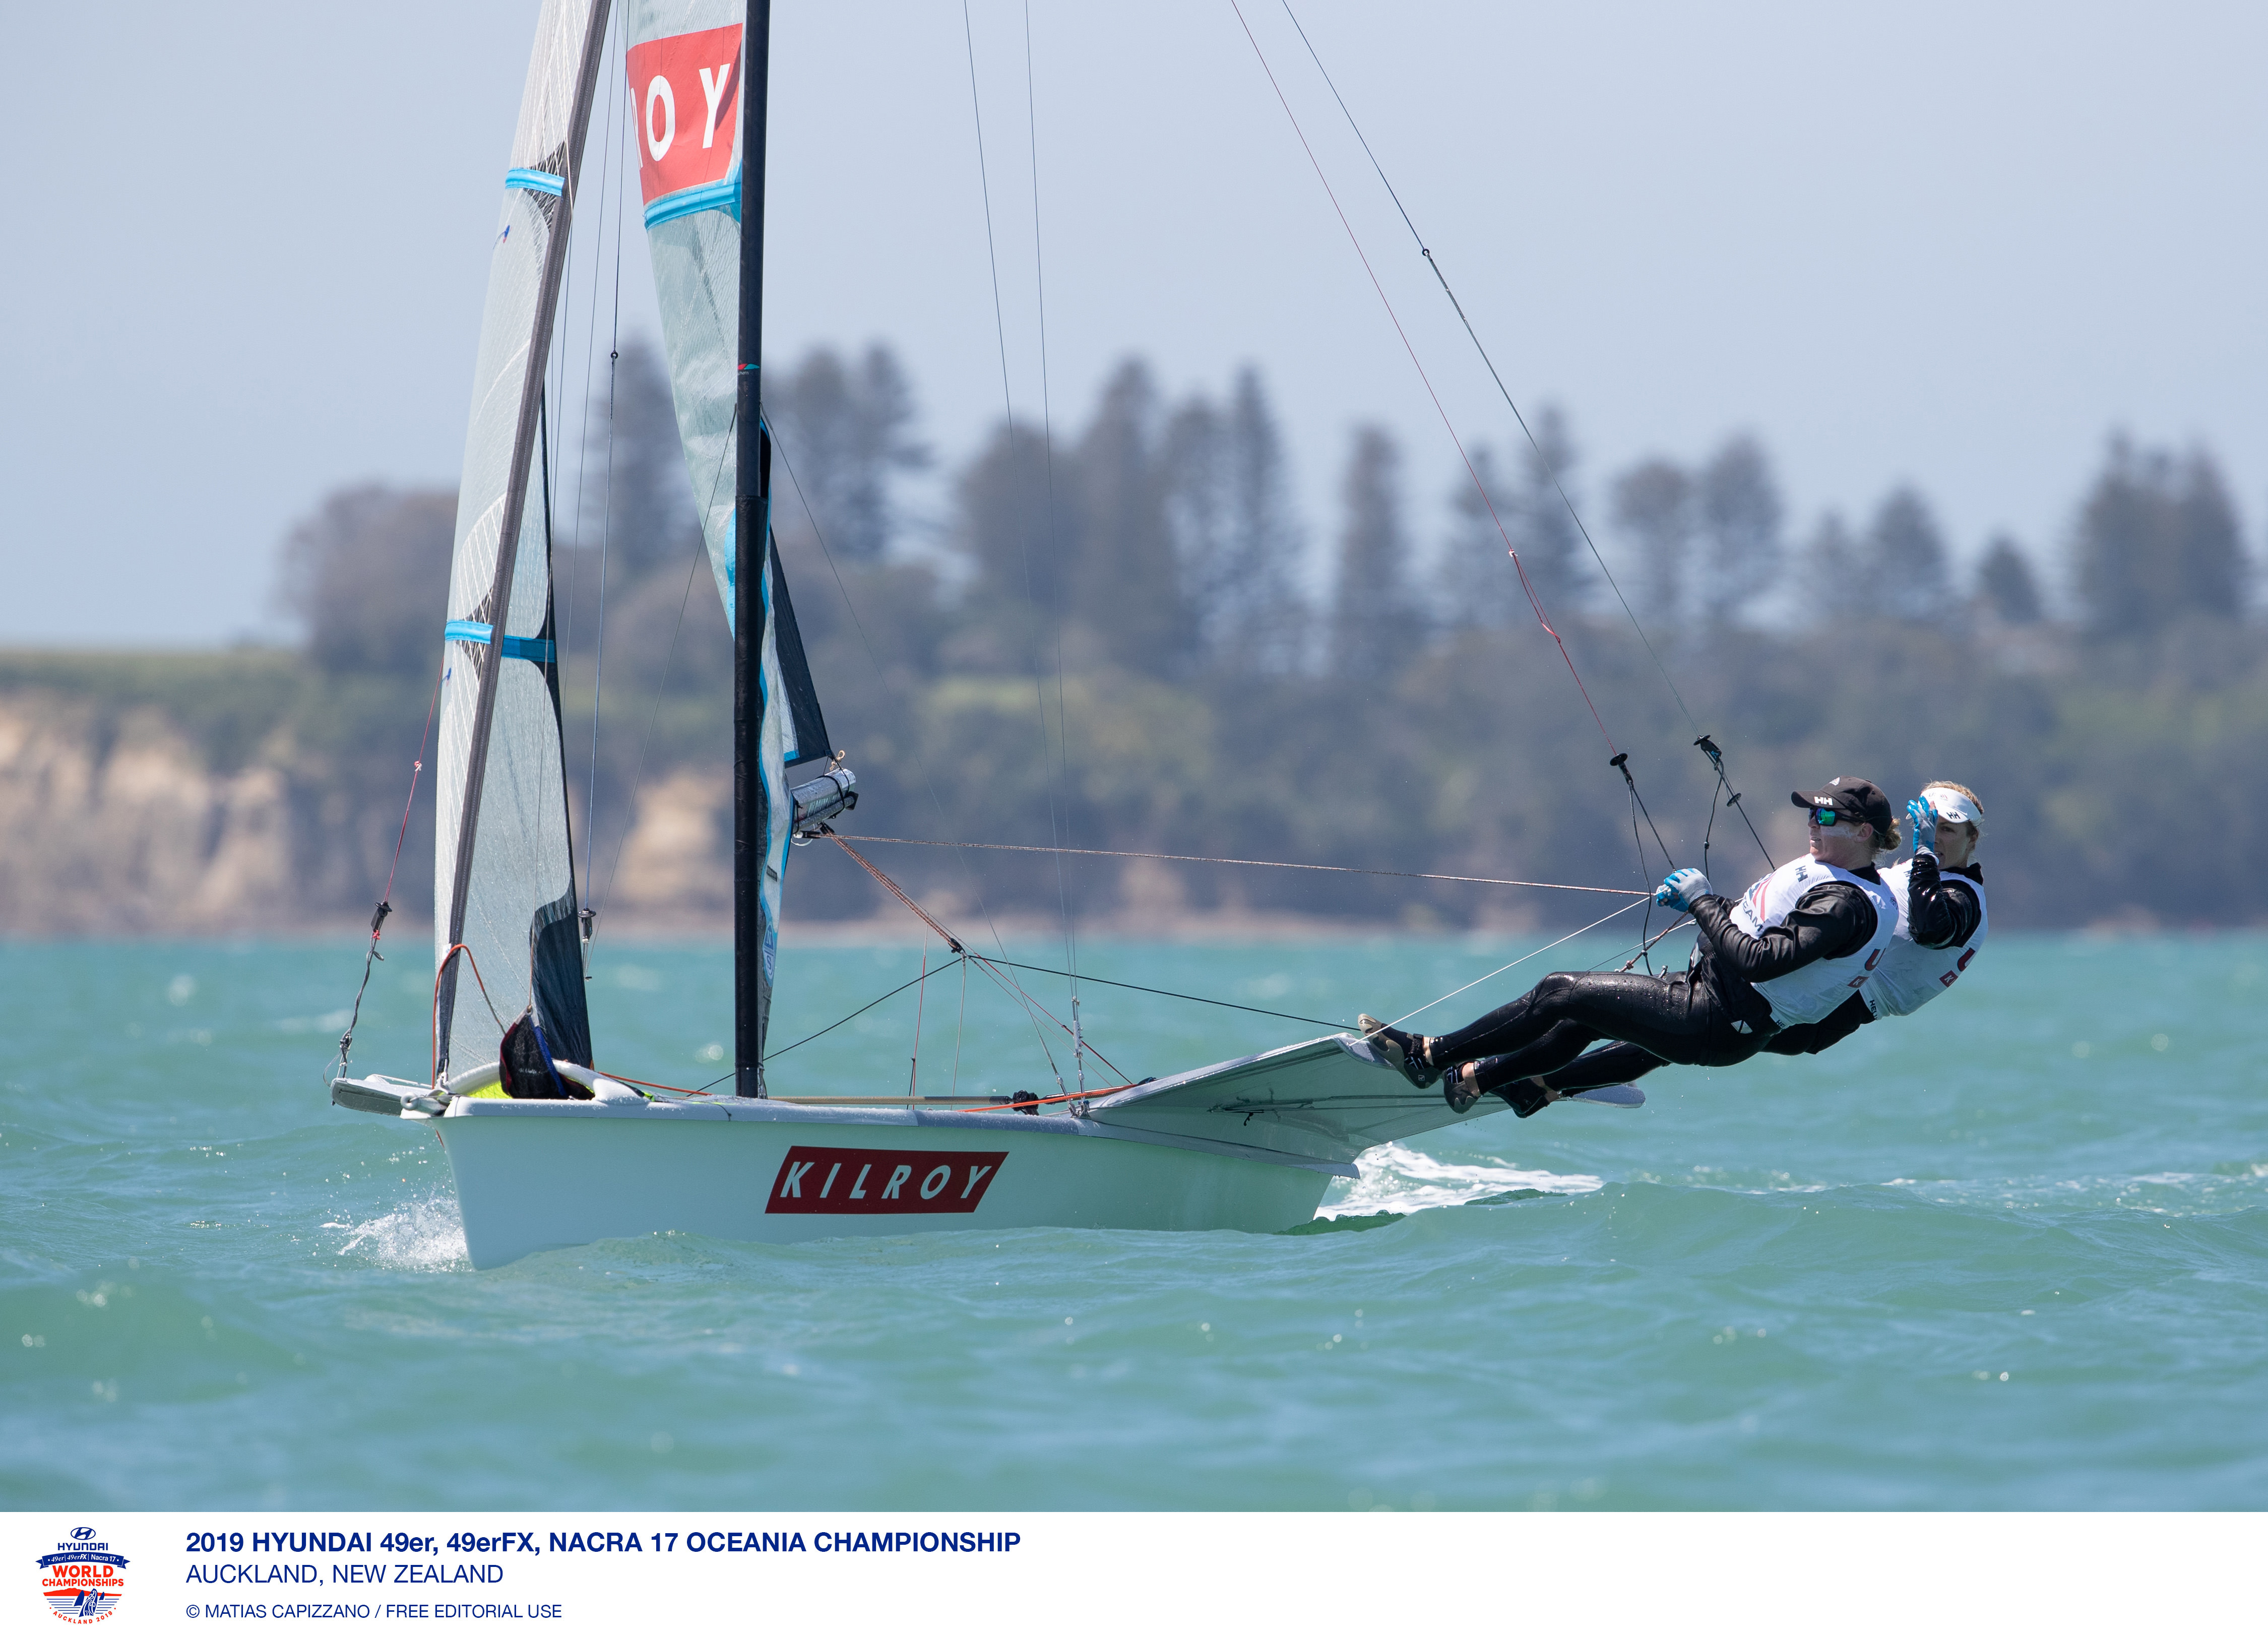 USA skiff teams lead from the front in Auckland